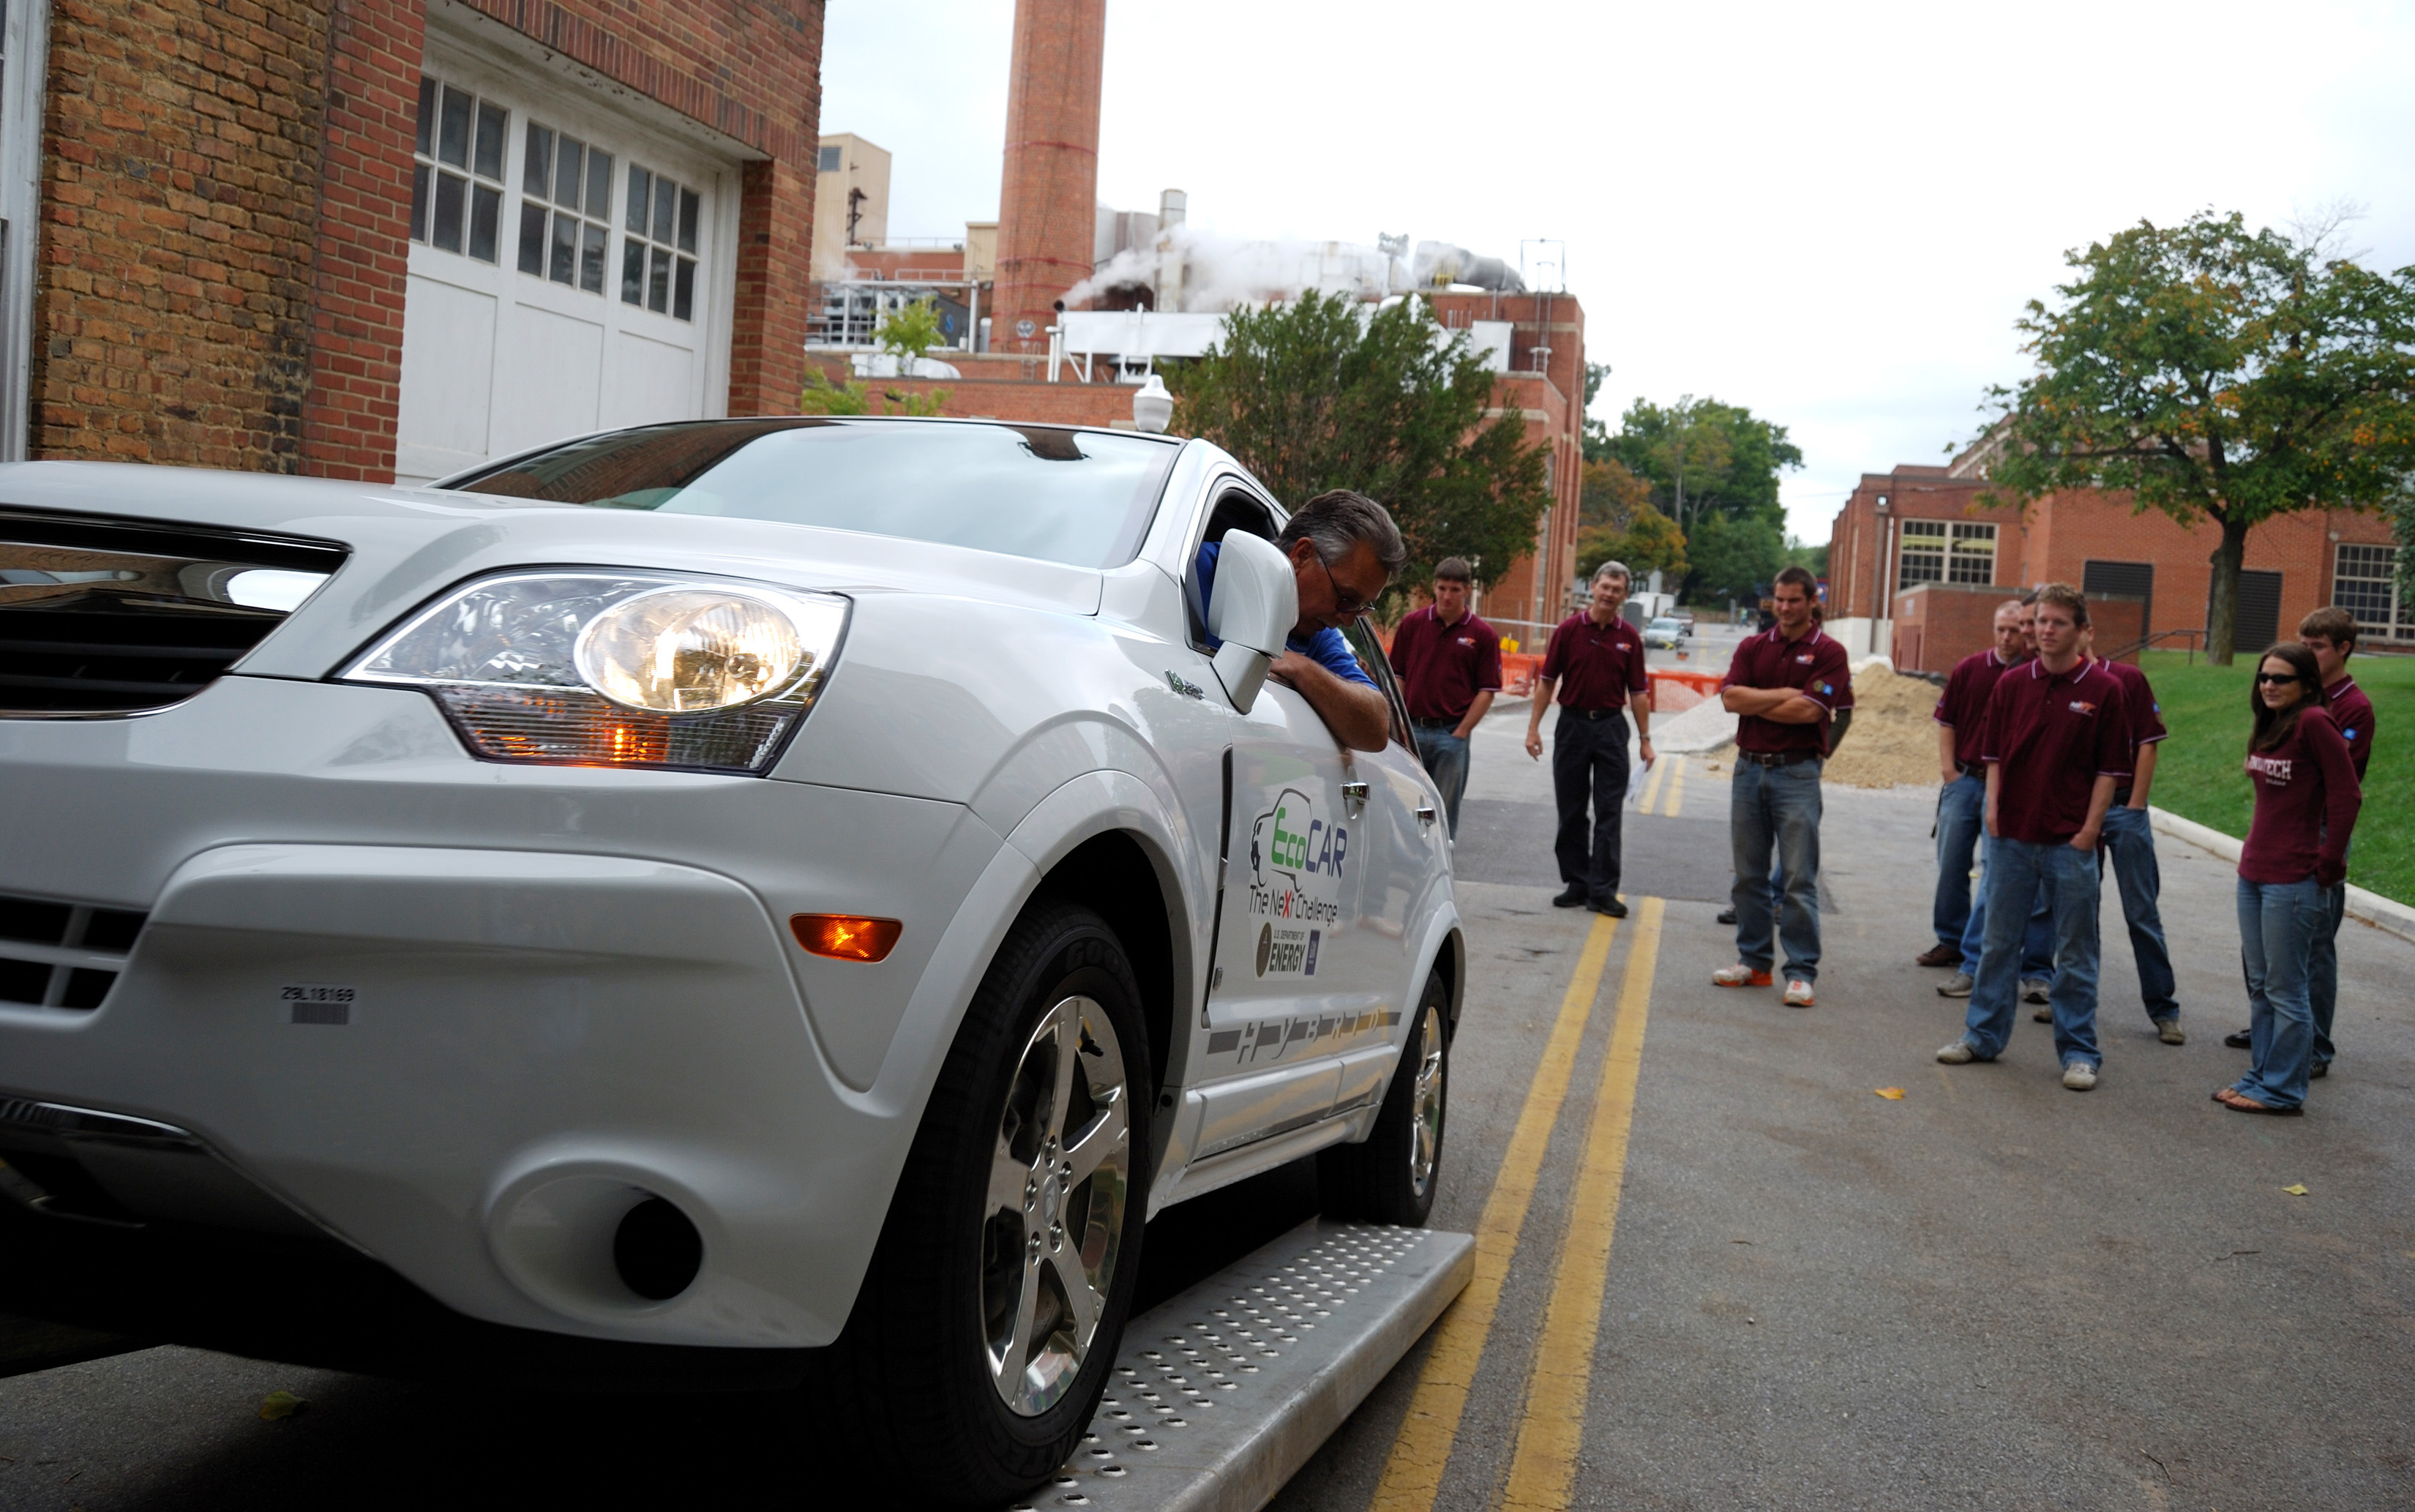 The 2009-10 Hybrid Electric Vehicle Team of Virginia Tech took delivery of a 2009 crossover SUV donated by General Motors this past fall.